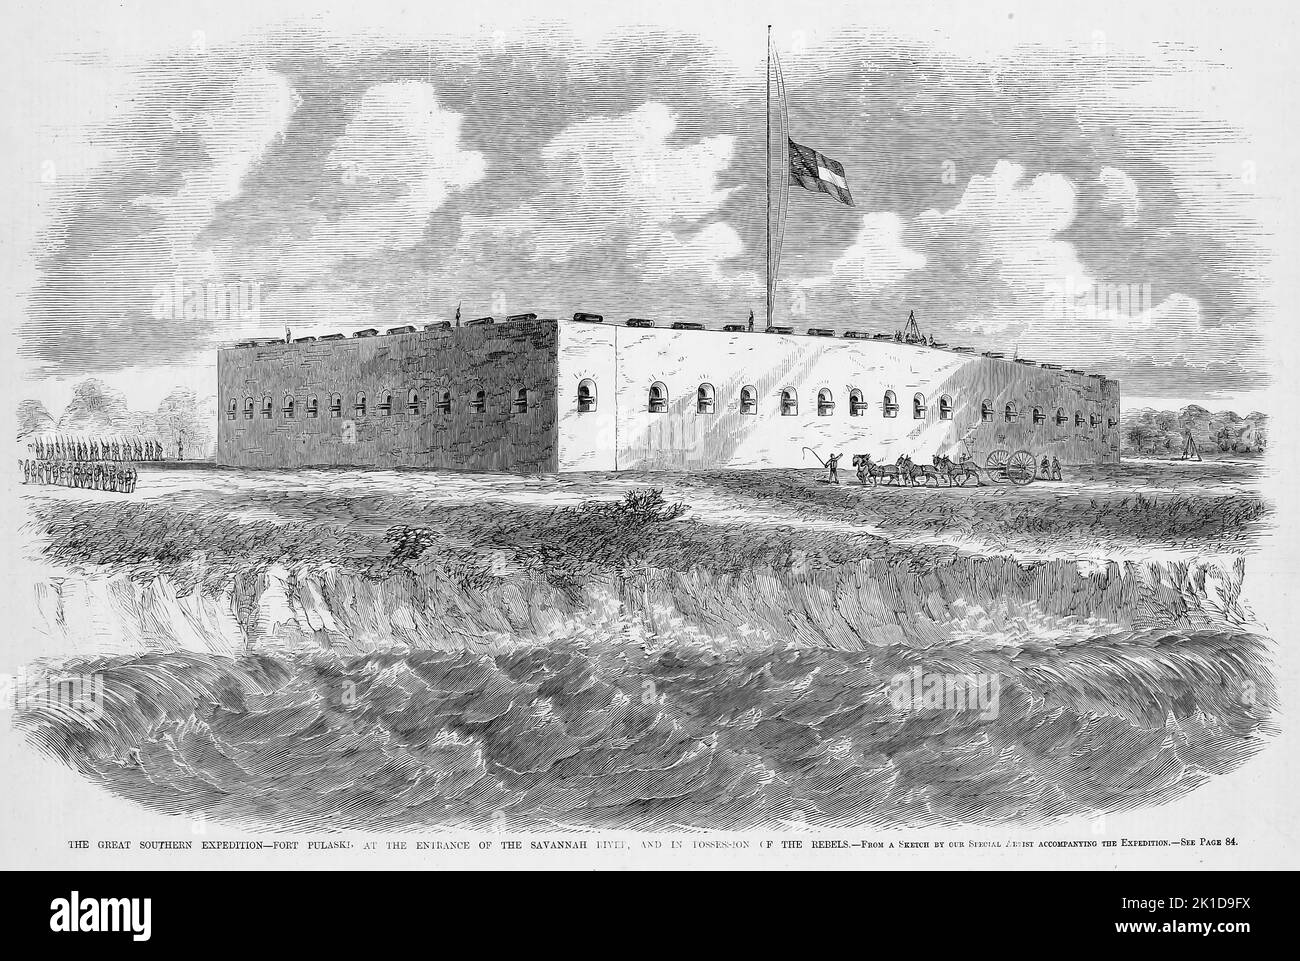 The Great Southern Expedition - Fort Pulaski, Georgia, at the entrance of the Savannah River, and in possession of the Rebels. December 1861. 19th century American Civil War illustration from Frank Leslie's Illustrated Newspaper Stock Photo